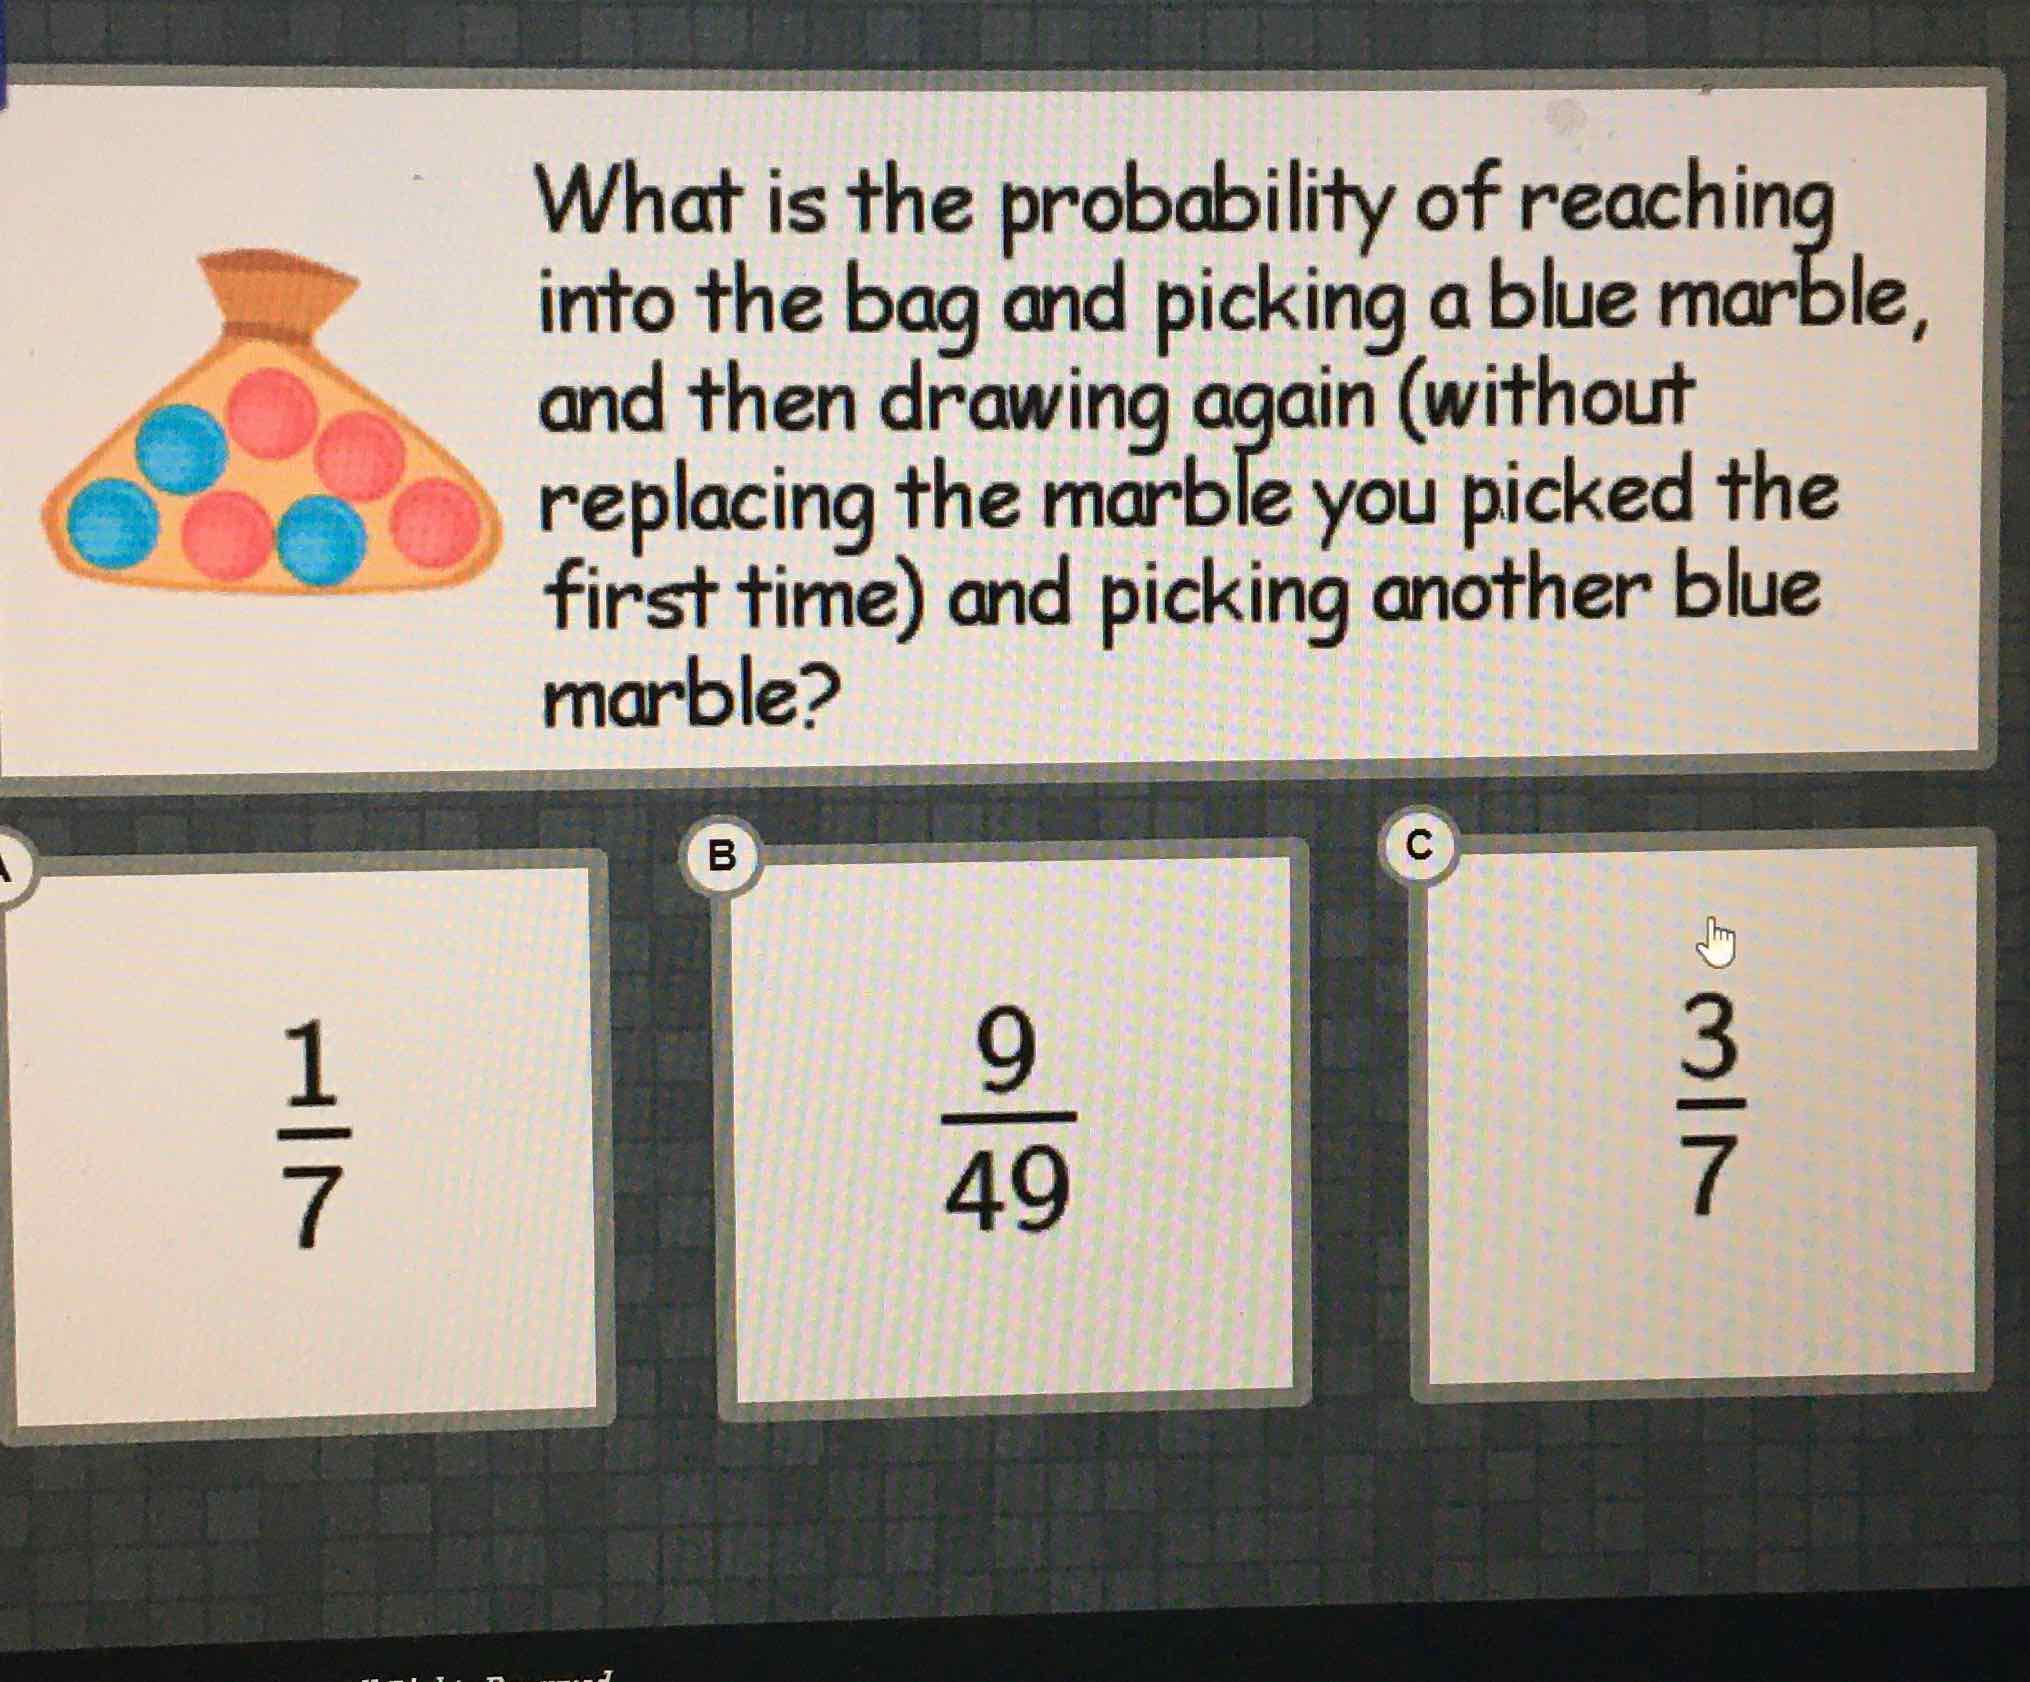 What is the probability of reaching into the bag and picking a blue marble, and then drawing again (without replacing the marble you picked the first time) and picking another blue marble?
\( \frac{1}{7} \)
\( \frac{9}{49} \)
\( \frac{3}{7} \)